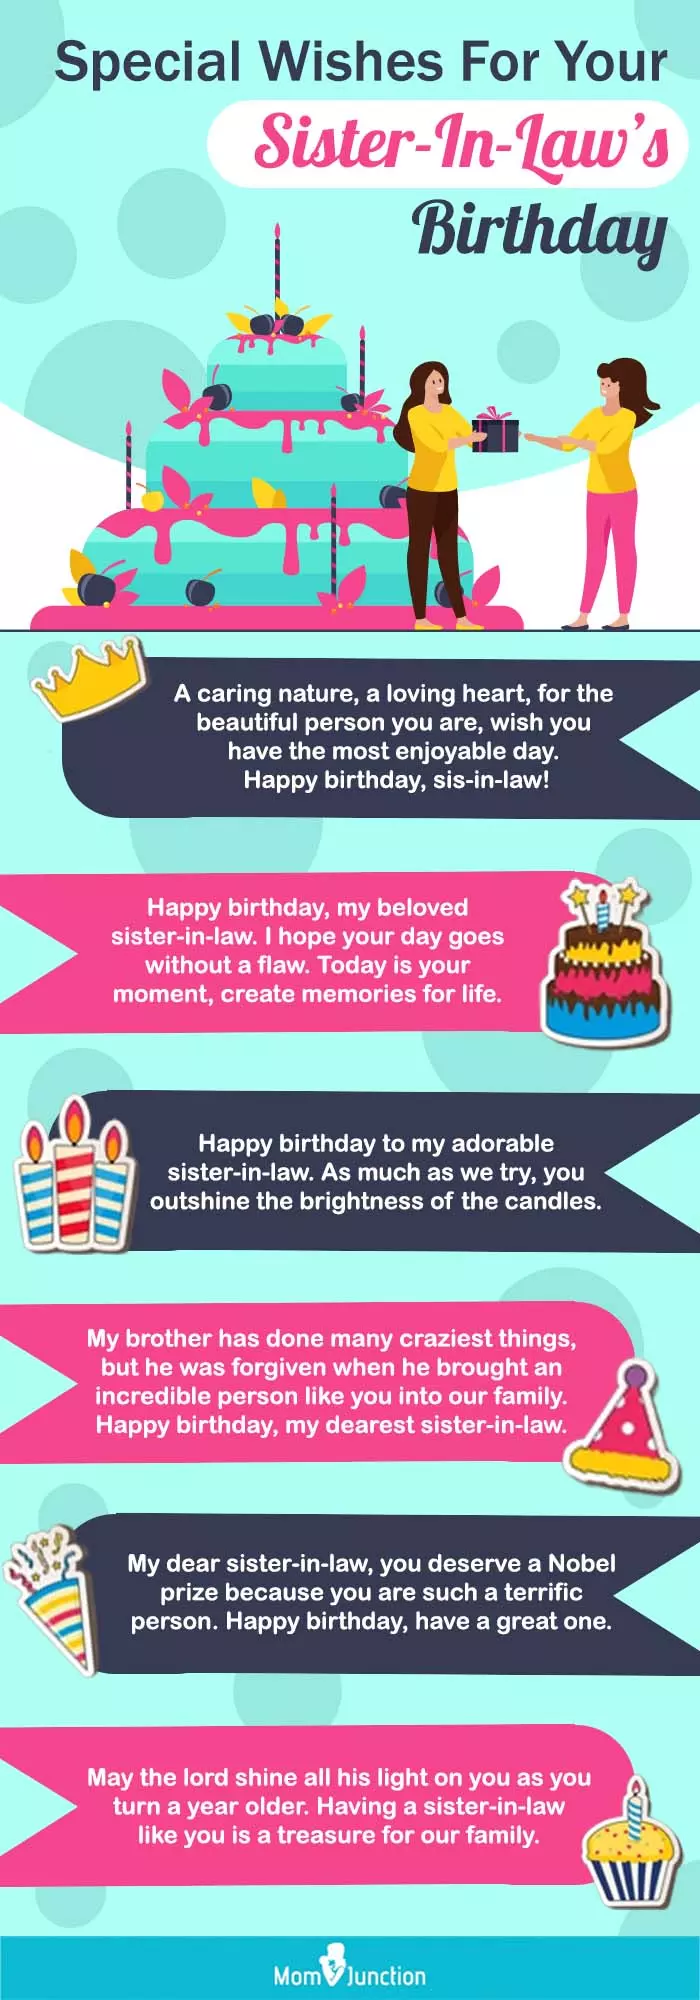 special wishes for your sister in laws birthday (infographic)